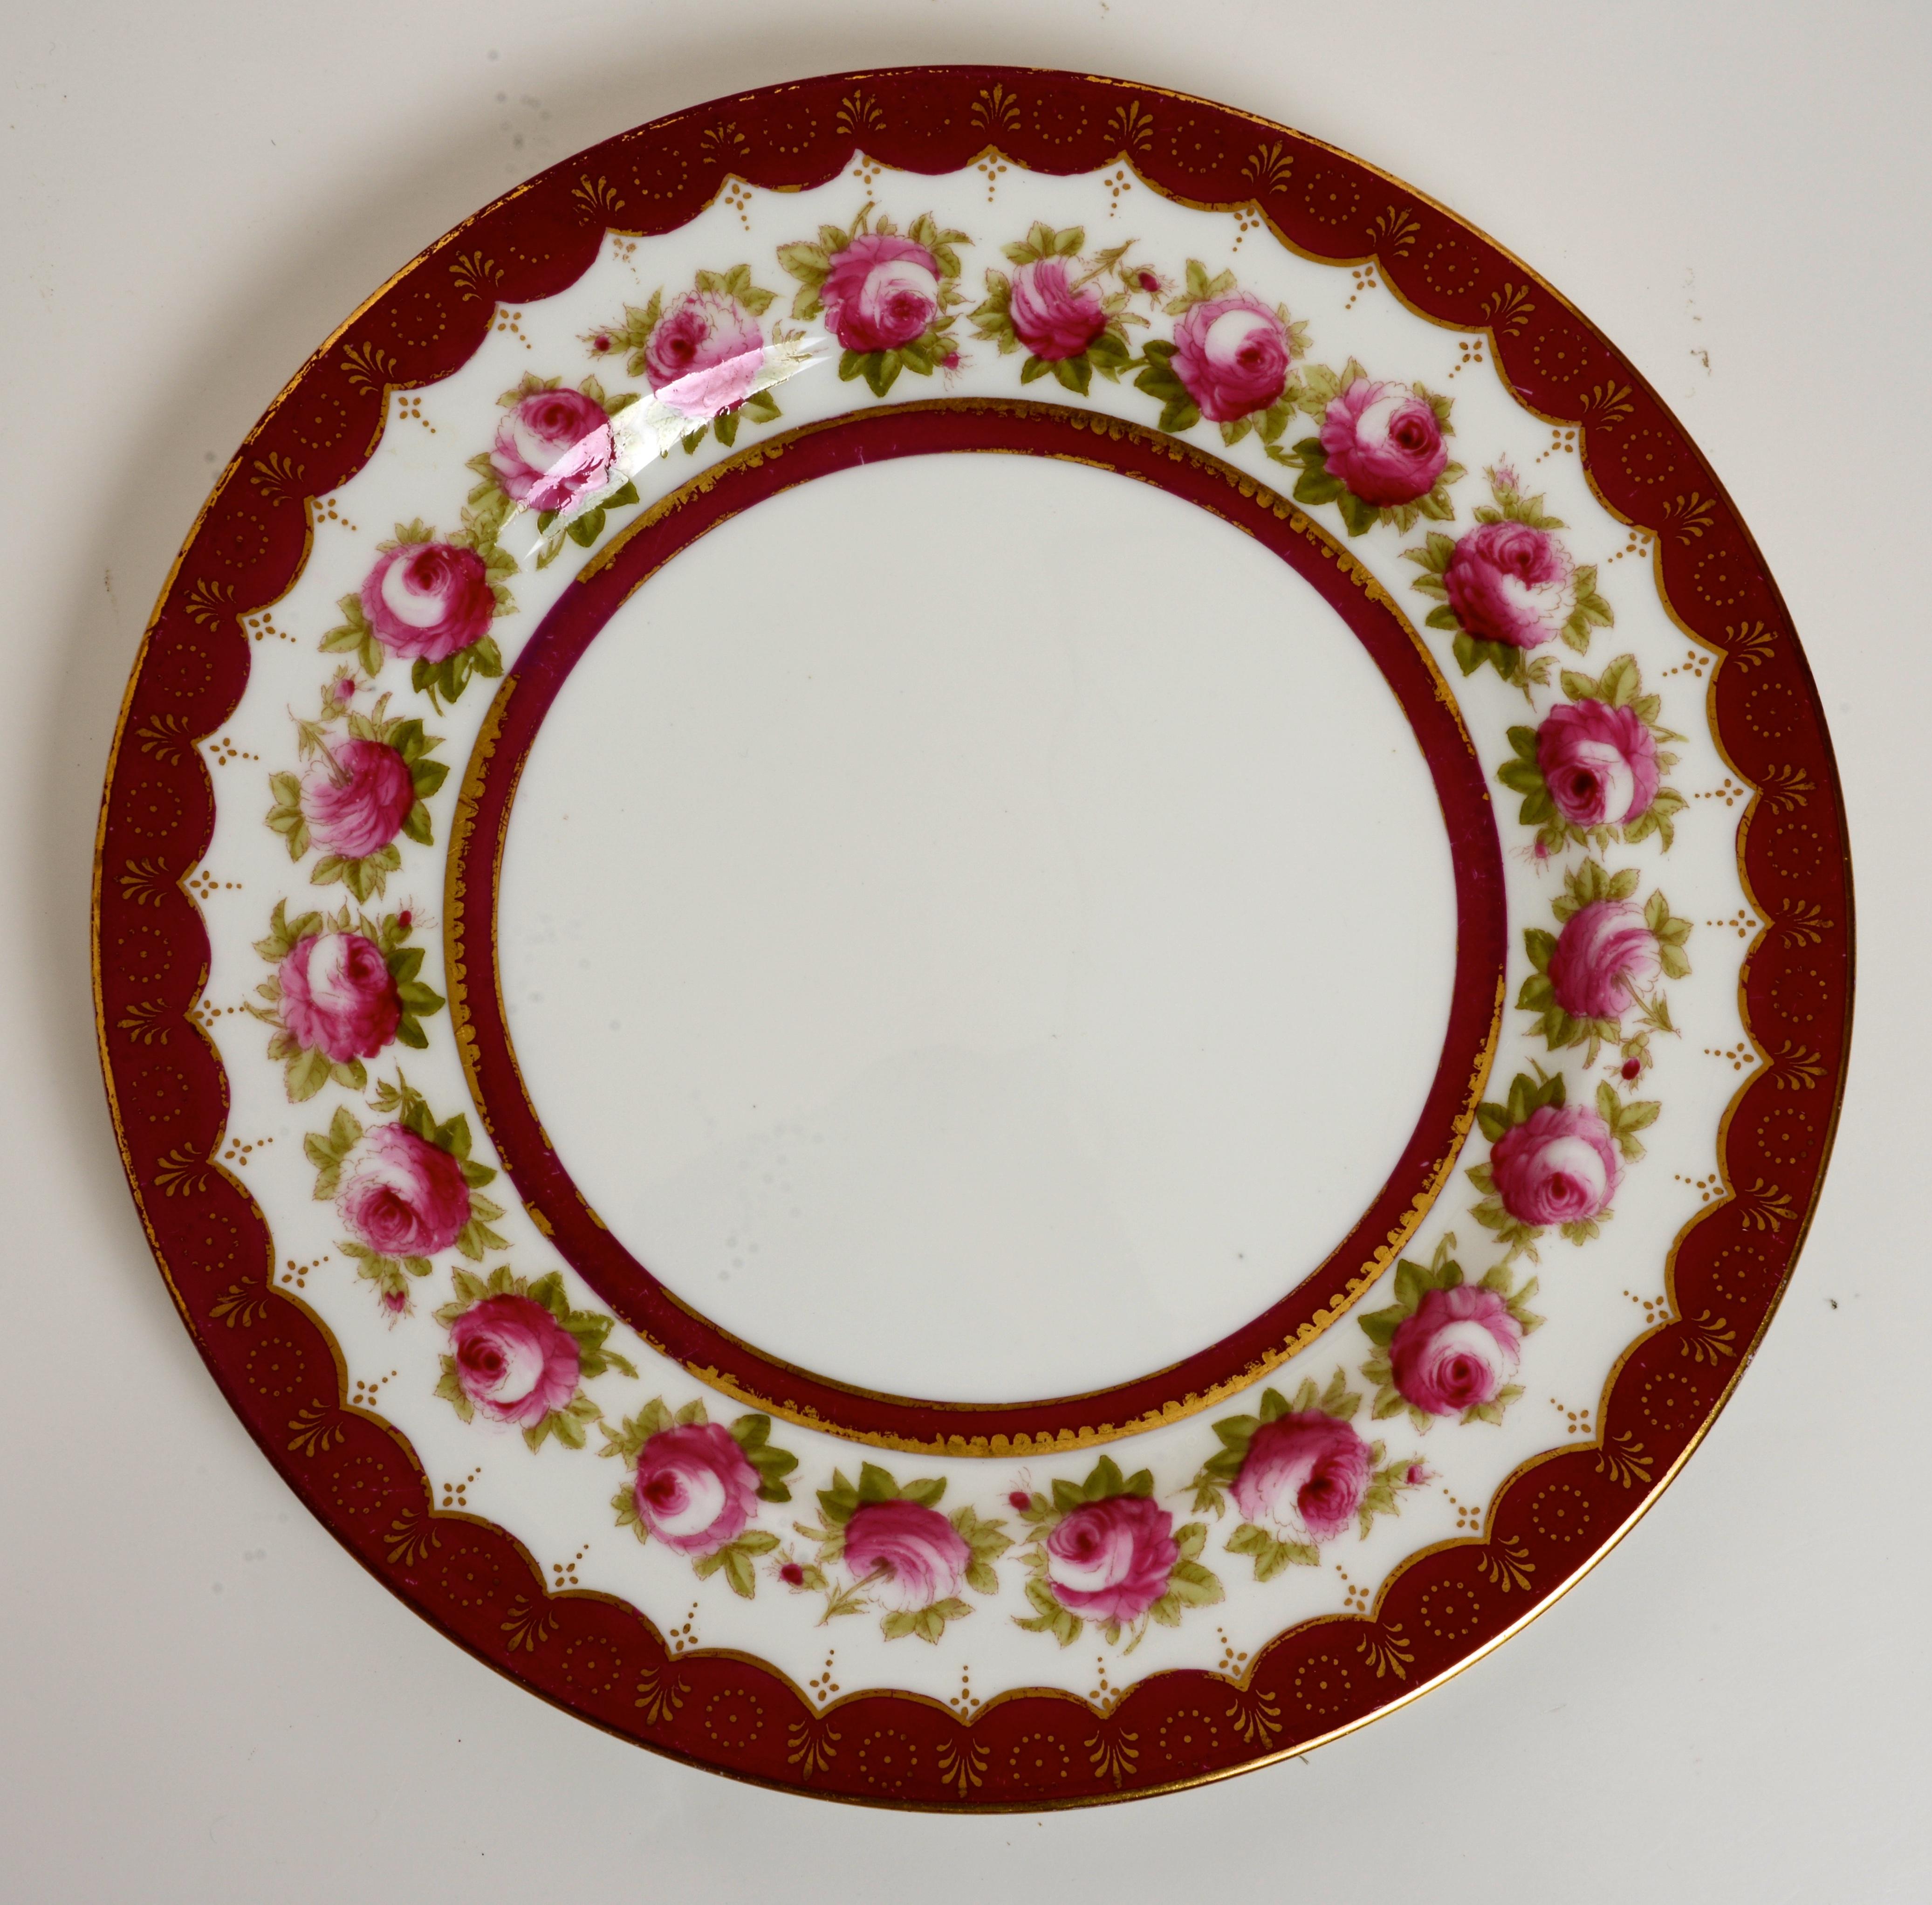 Set of 14 Dinner Plates by Royal Cauldon England in a Rose Pattern. Pattern: Z1302. This is a discontinued pattern. These porcelain plates are a suitable size for the main course of pasta, salad, appetizer, sandwiches and steak.